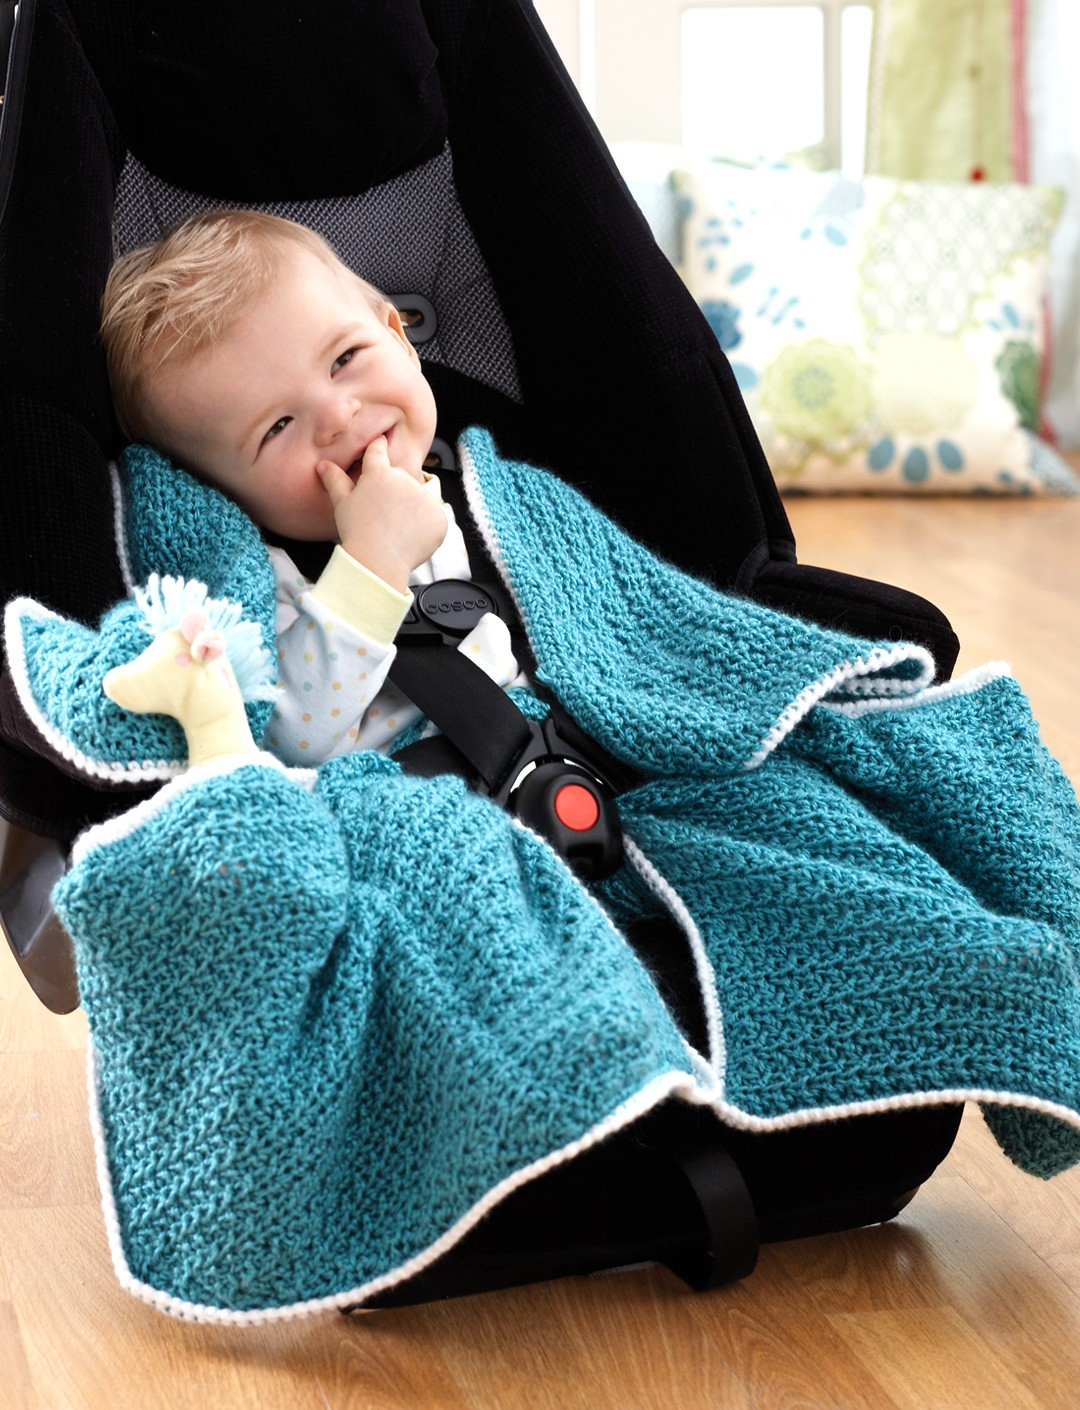 Car Seat Knitted Blanket Pattern 12 Best Photos Of Free Knitted Car Seat Blanket Pattern Ba Car